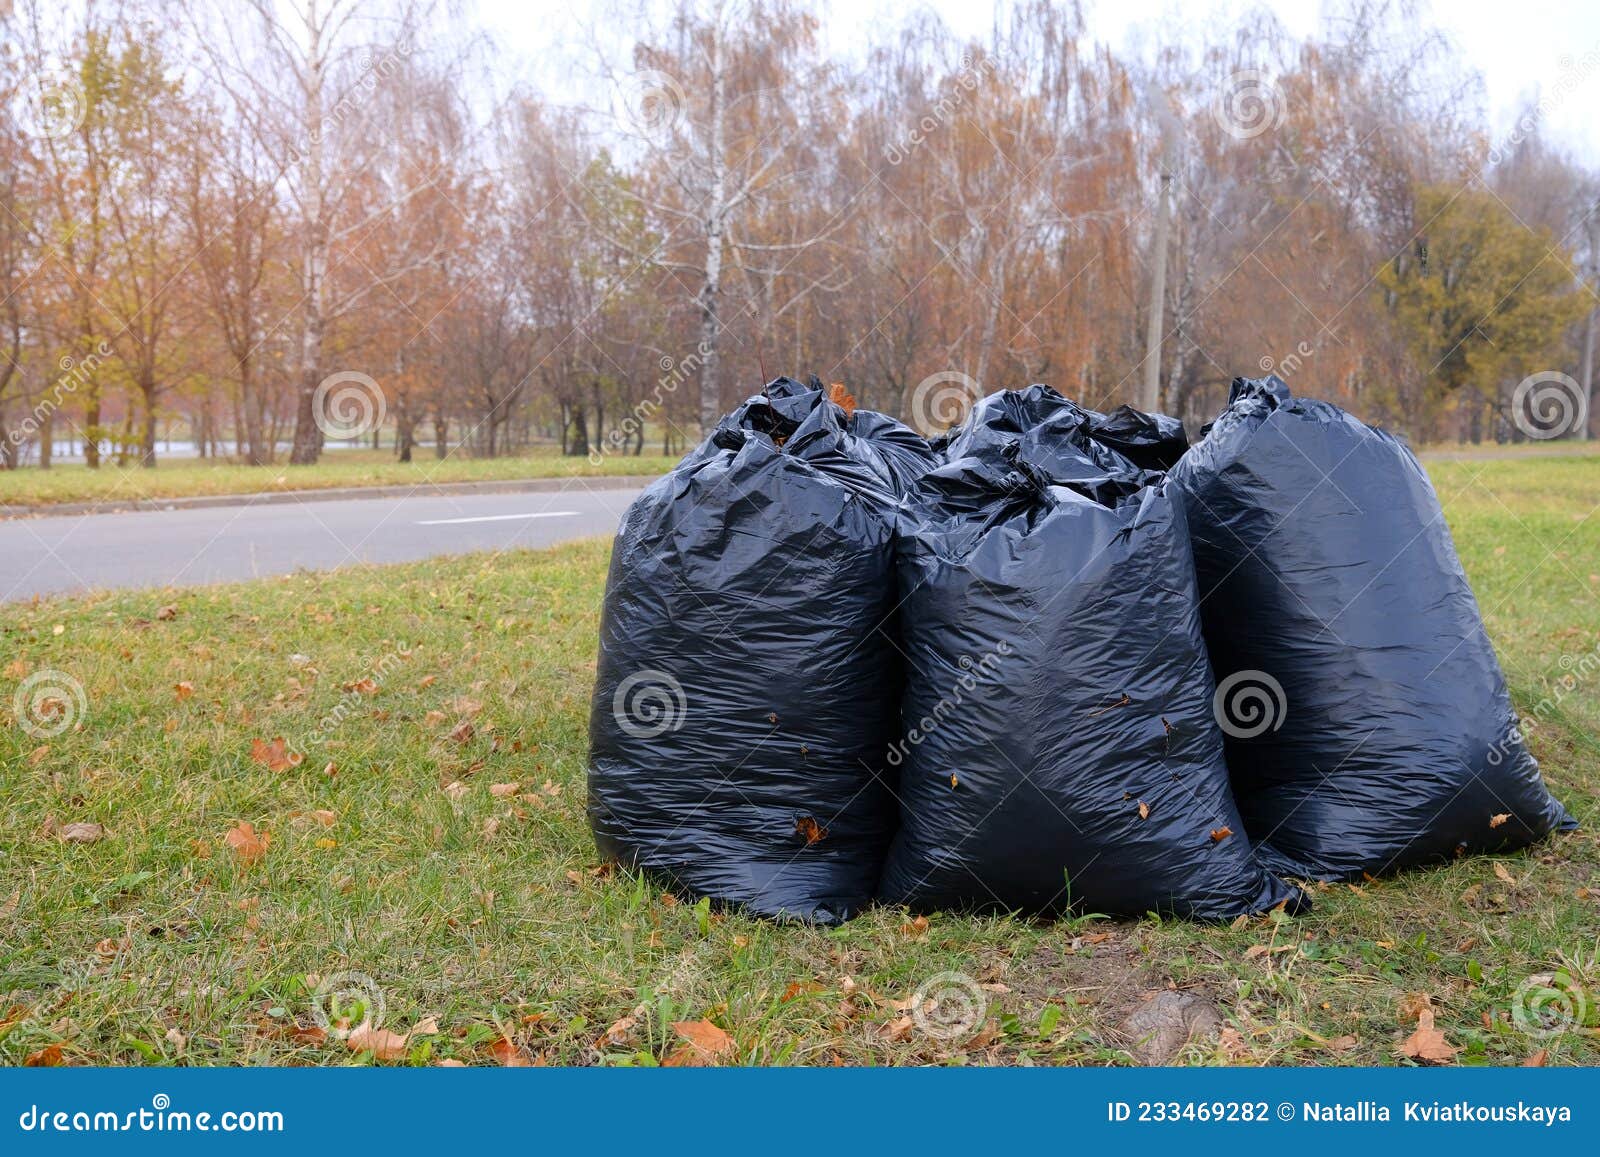 Lots of Black Trash Bags with Autumn Leaves in Them Around a Tree